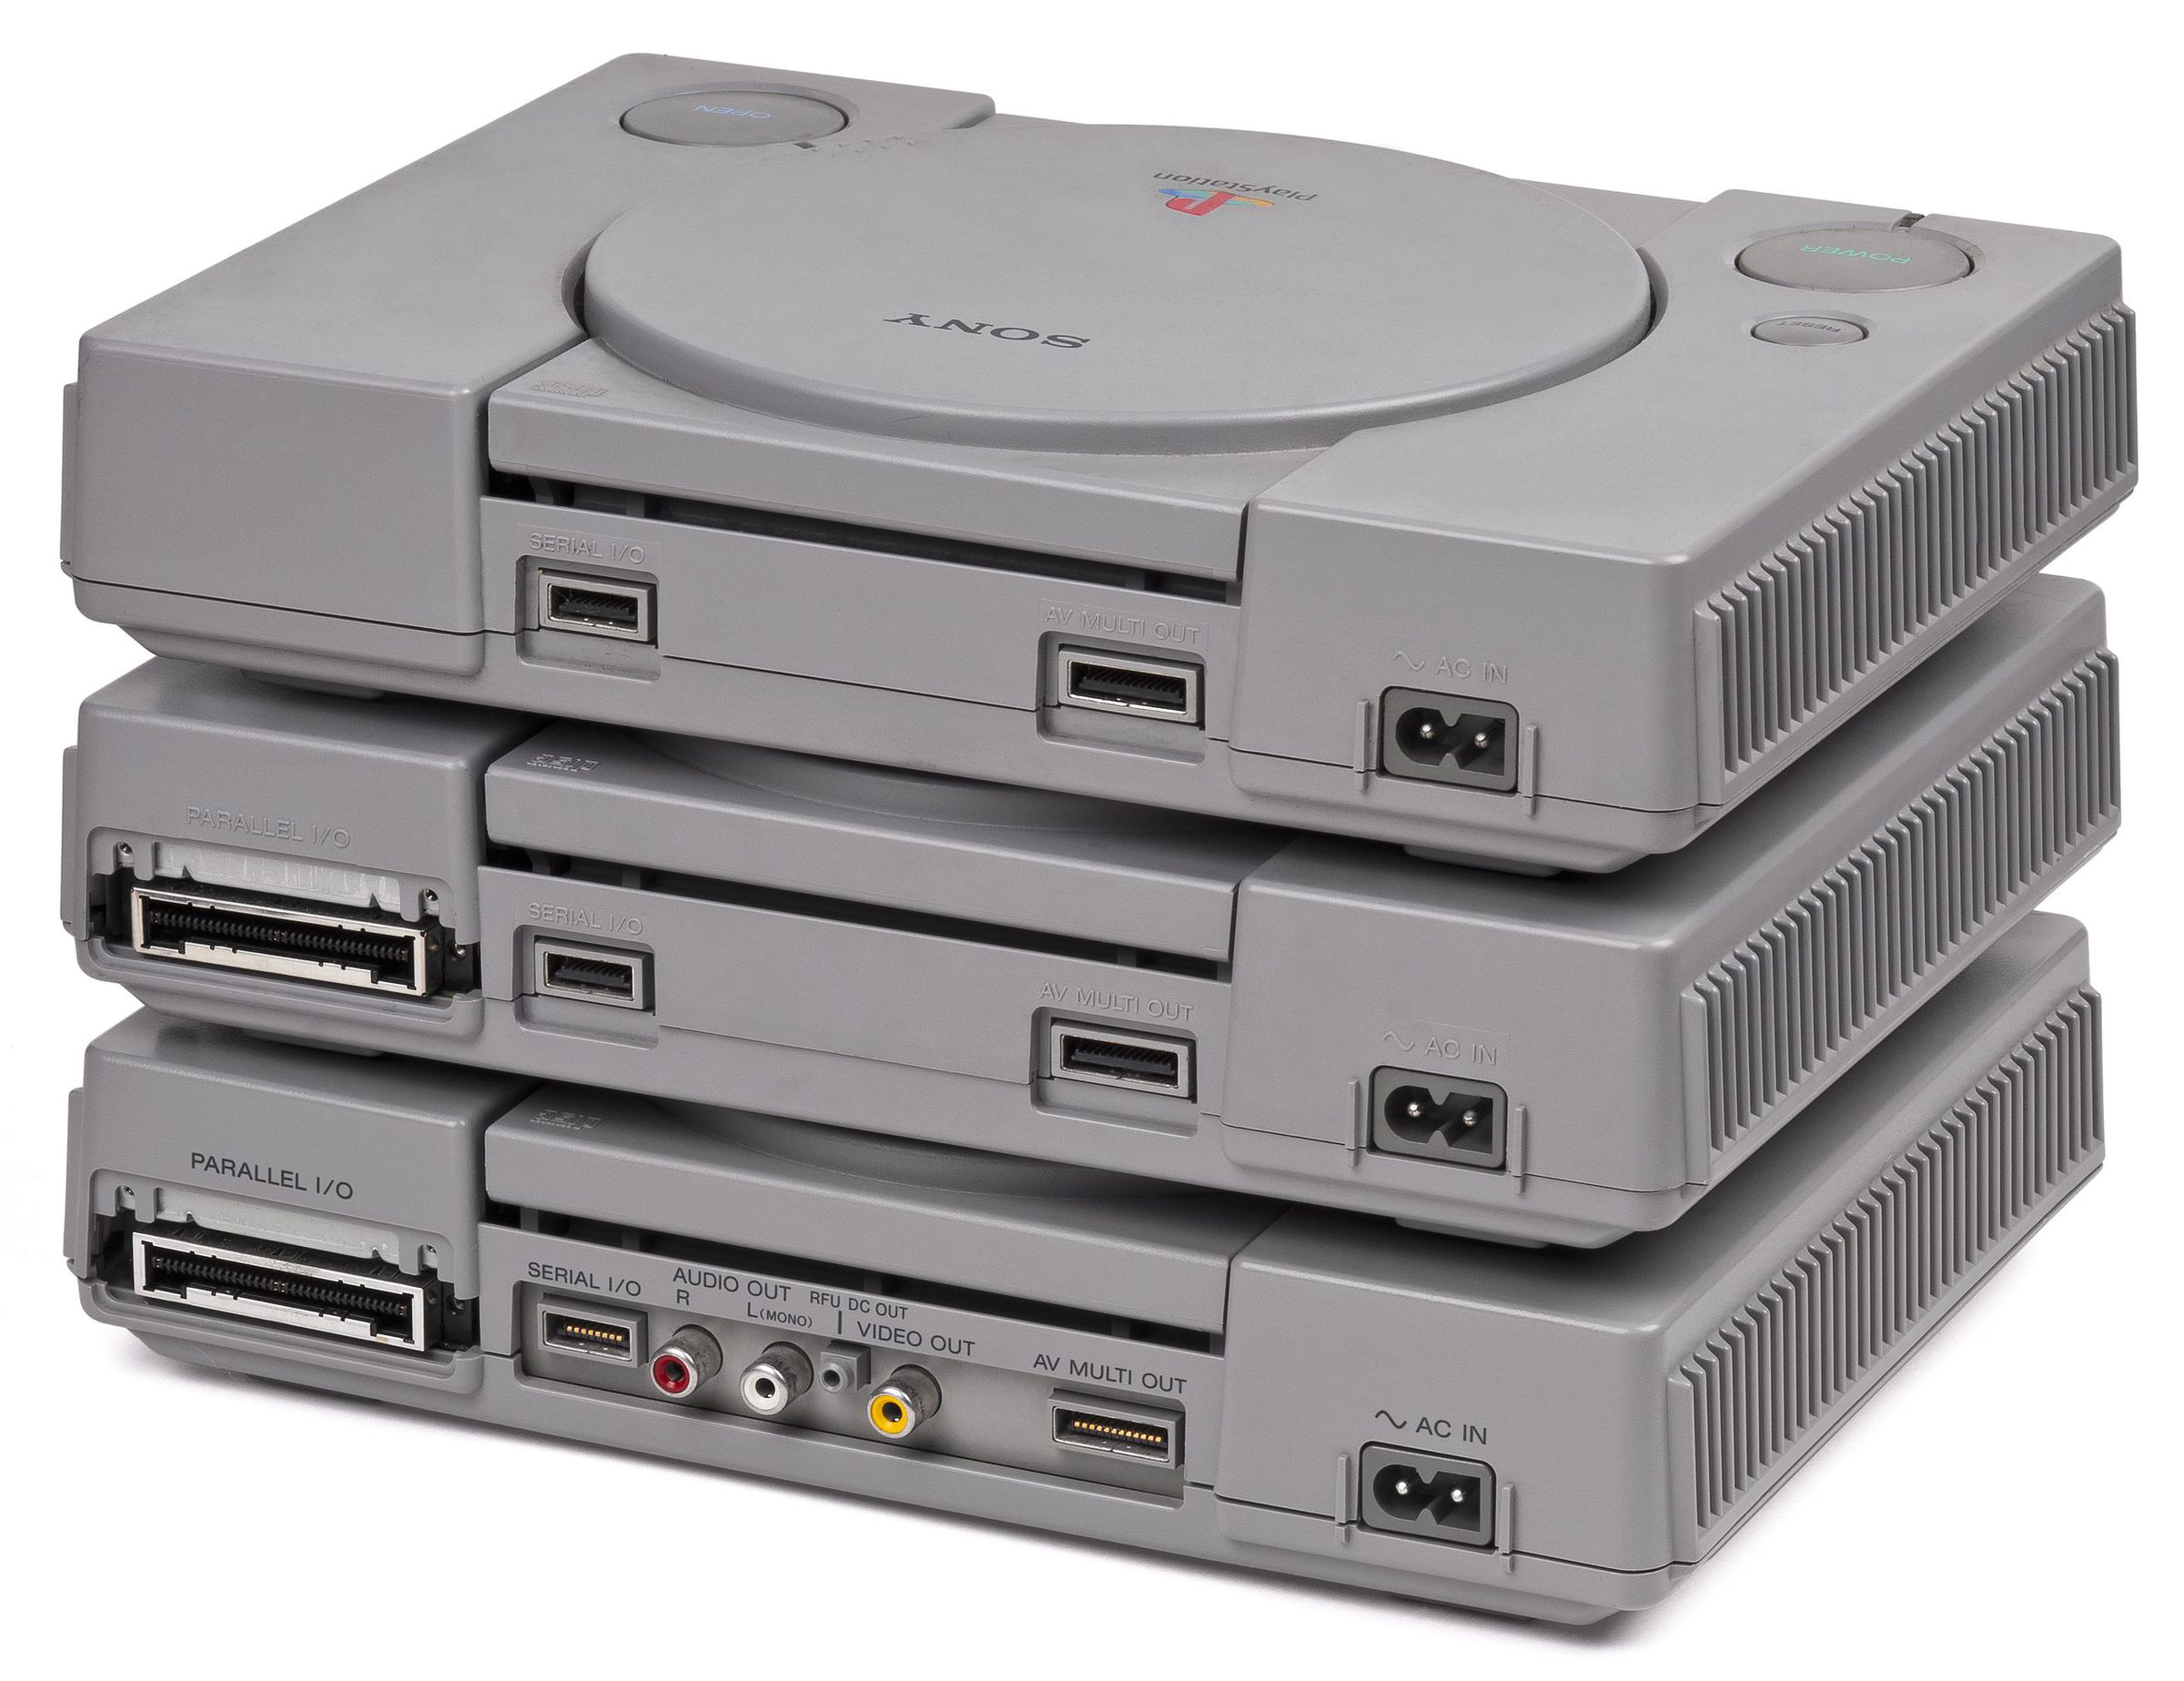 Revisions of the original Sony PlayStation.